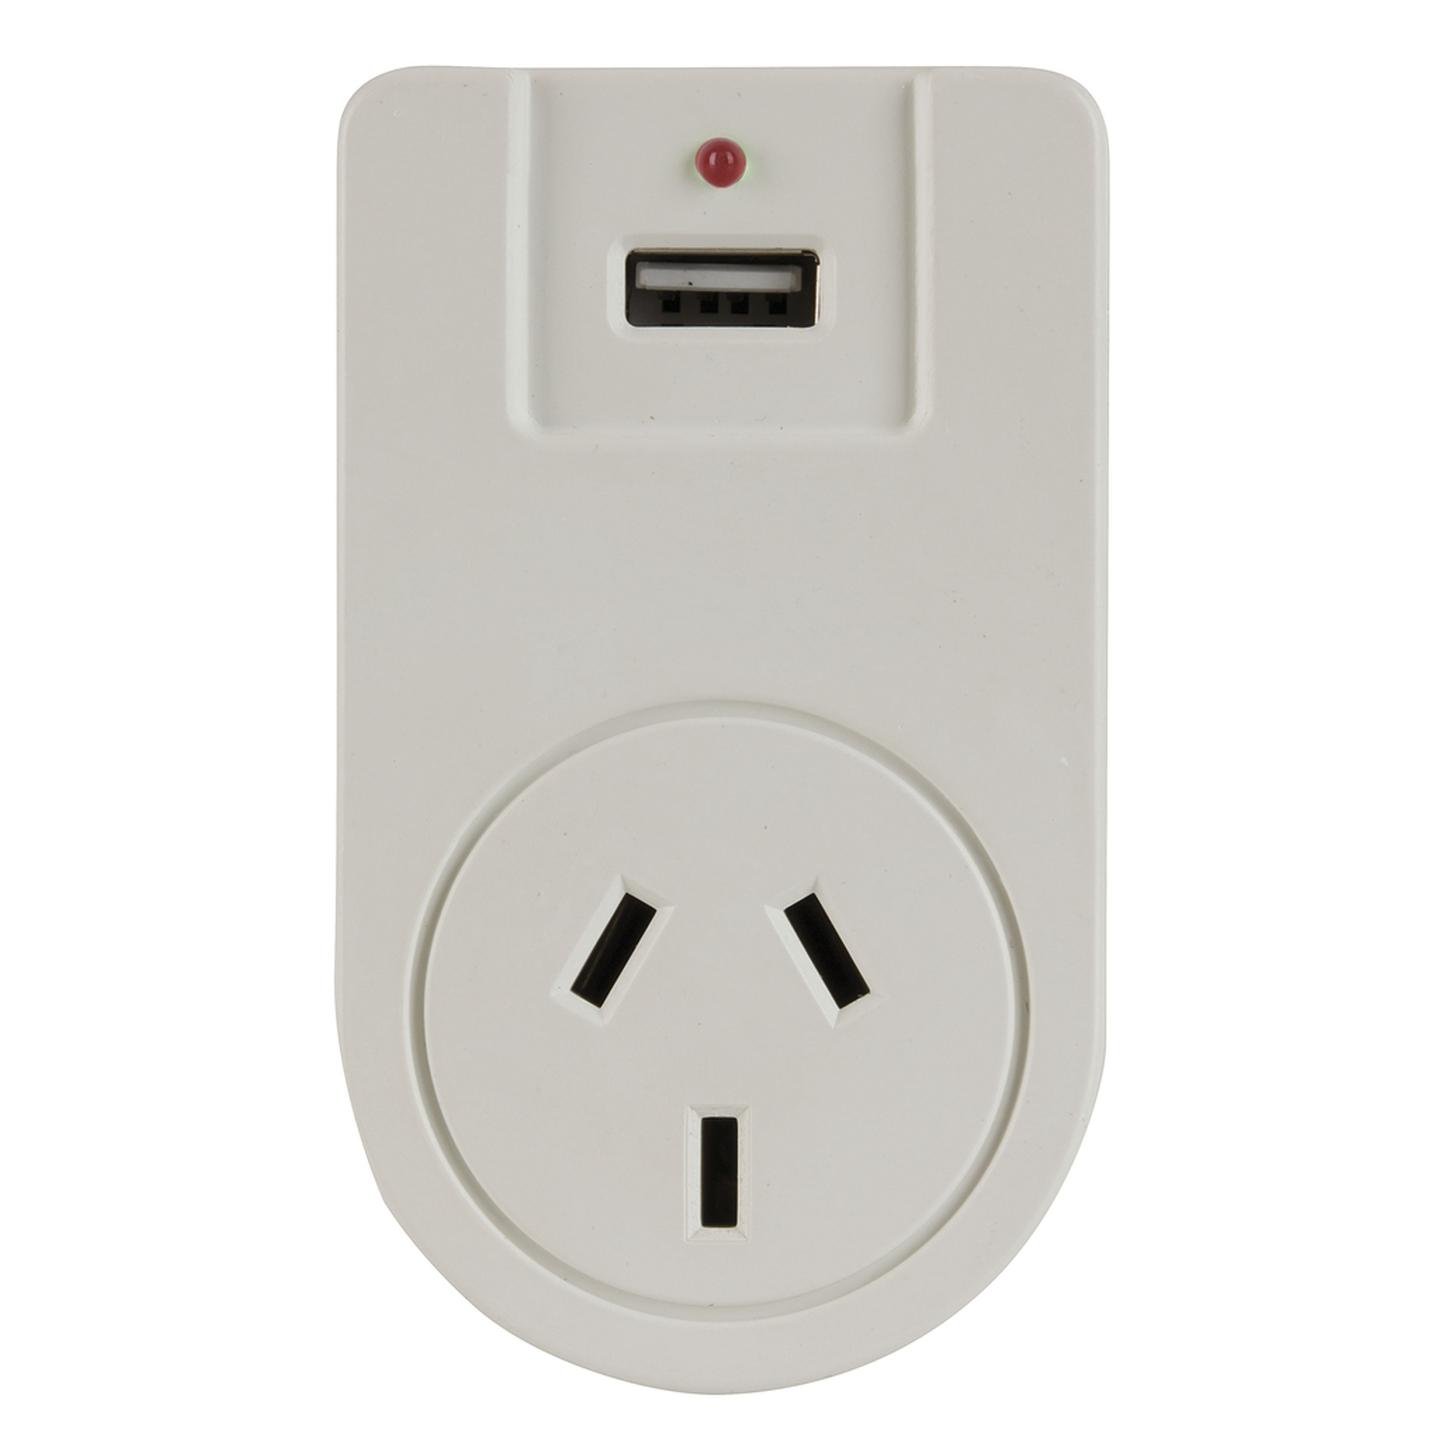 Europe Mains Travel Adaptor with USB